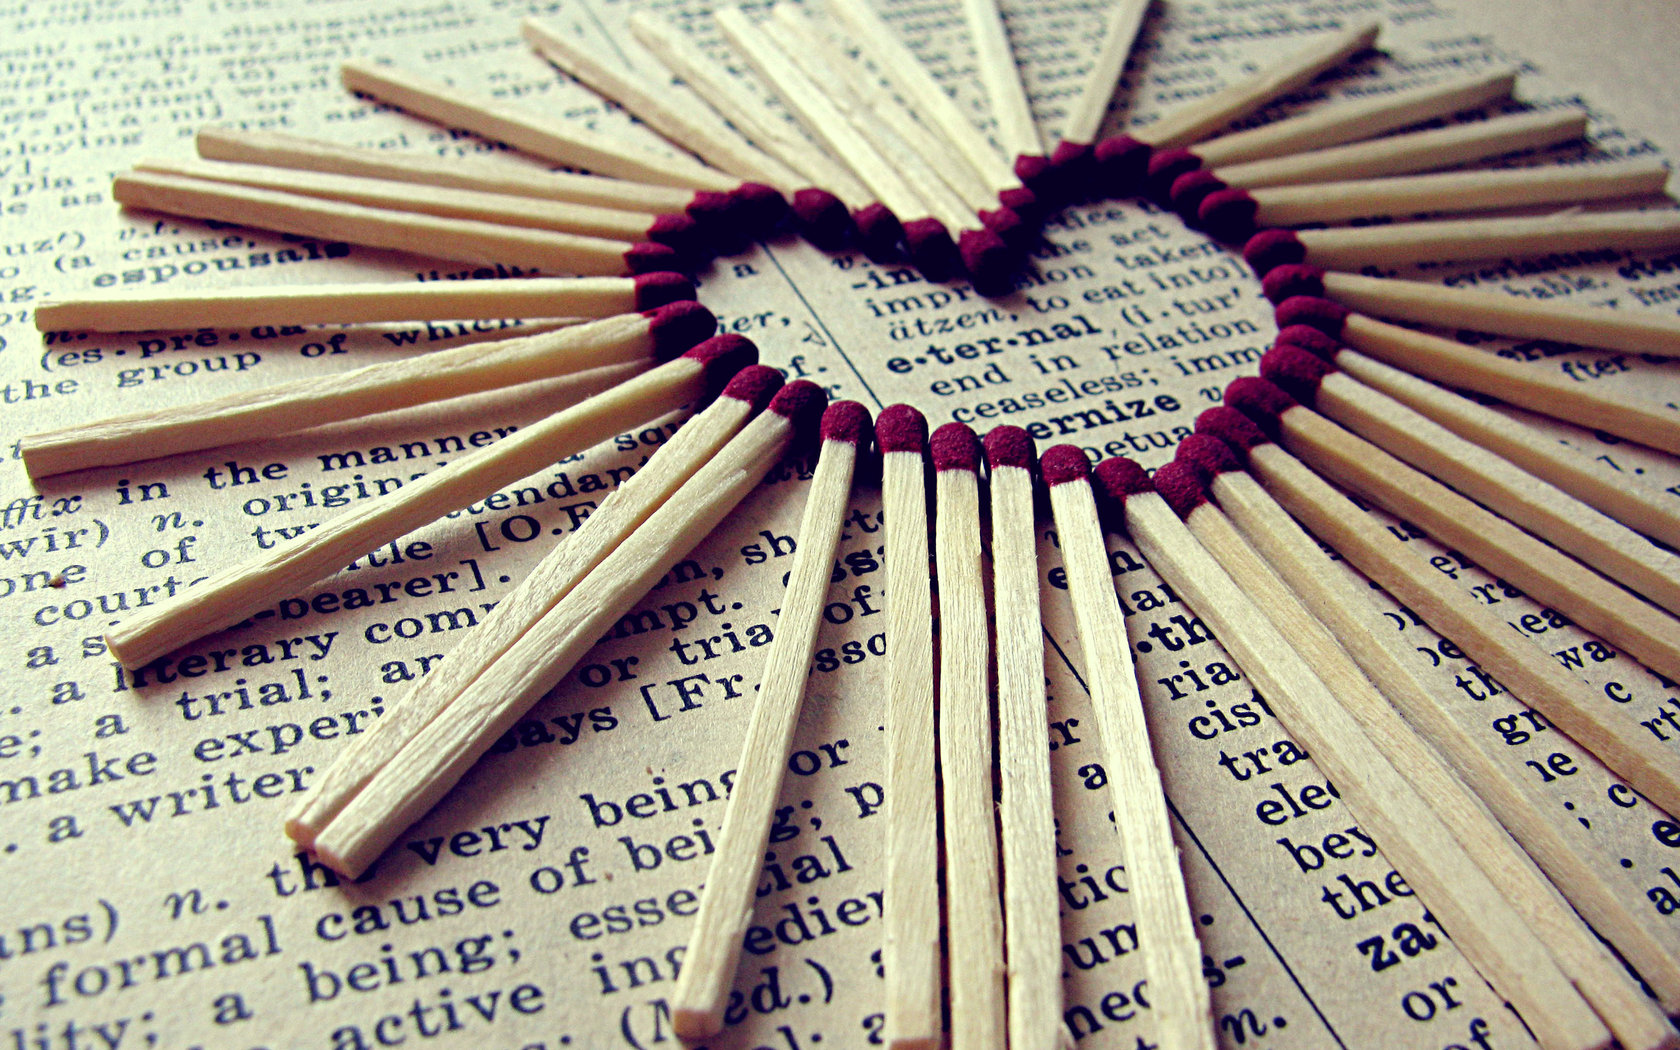 Heart of matches